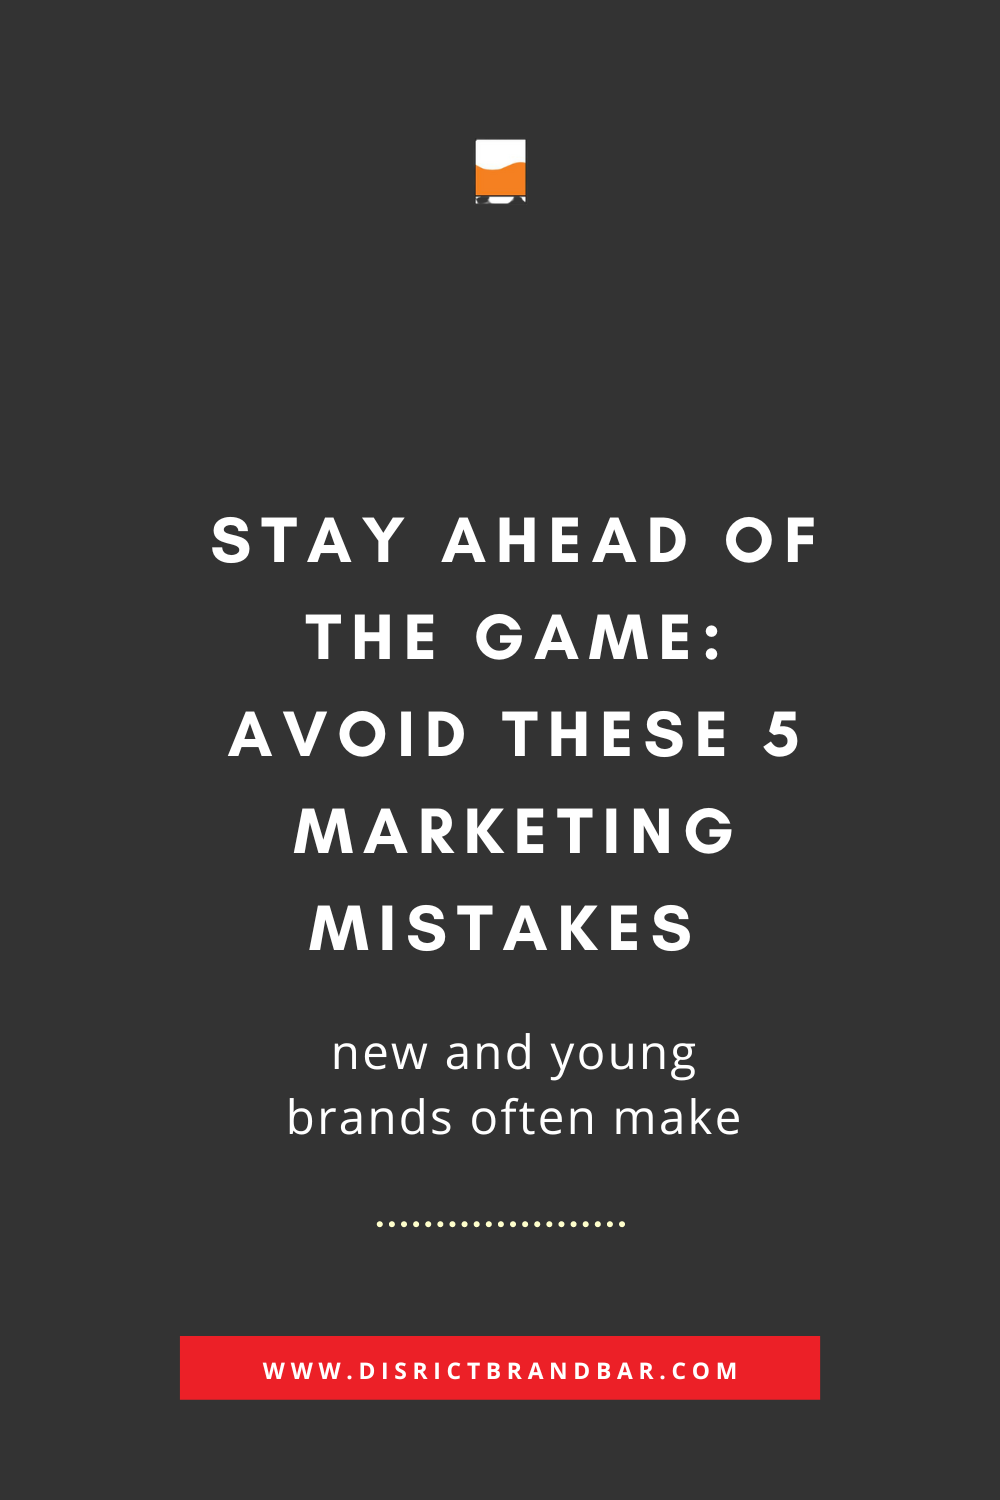 The 5 Marketing Mistakes New and Young Brands Make